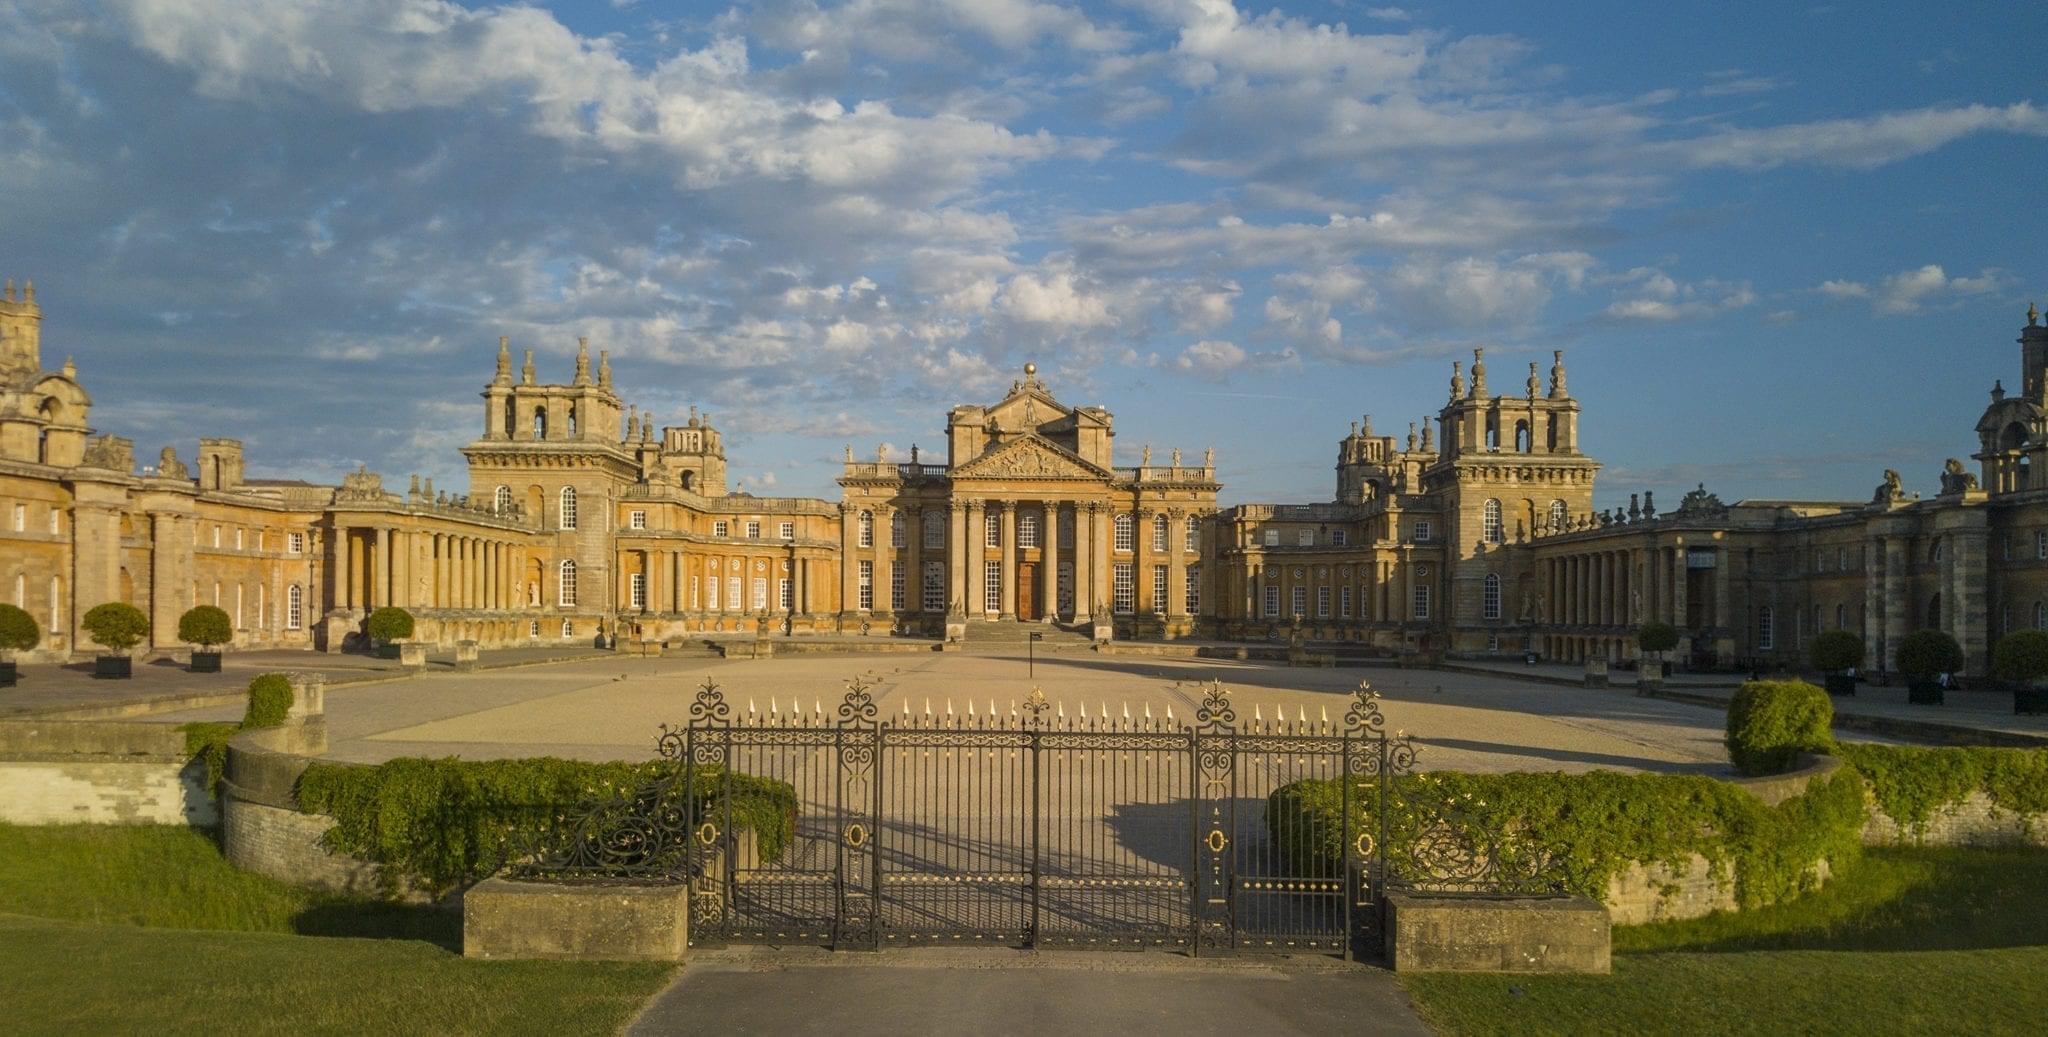 Blenheim Palace Admission Tickets, Oxford